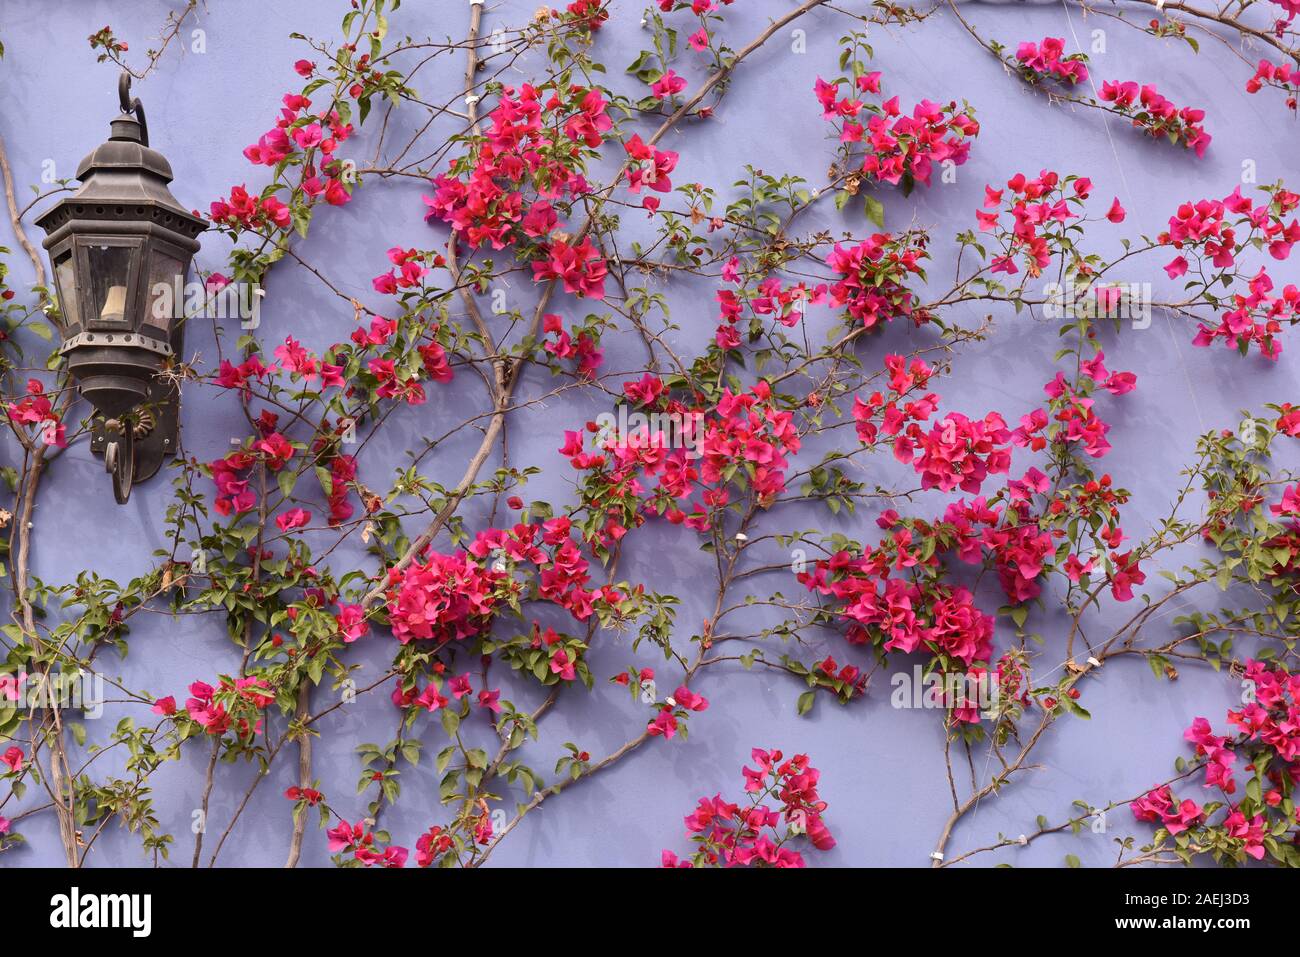 Bougainvilleas flowers on a wall Stock Photo